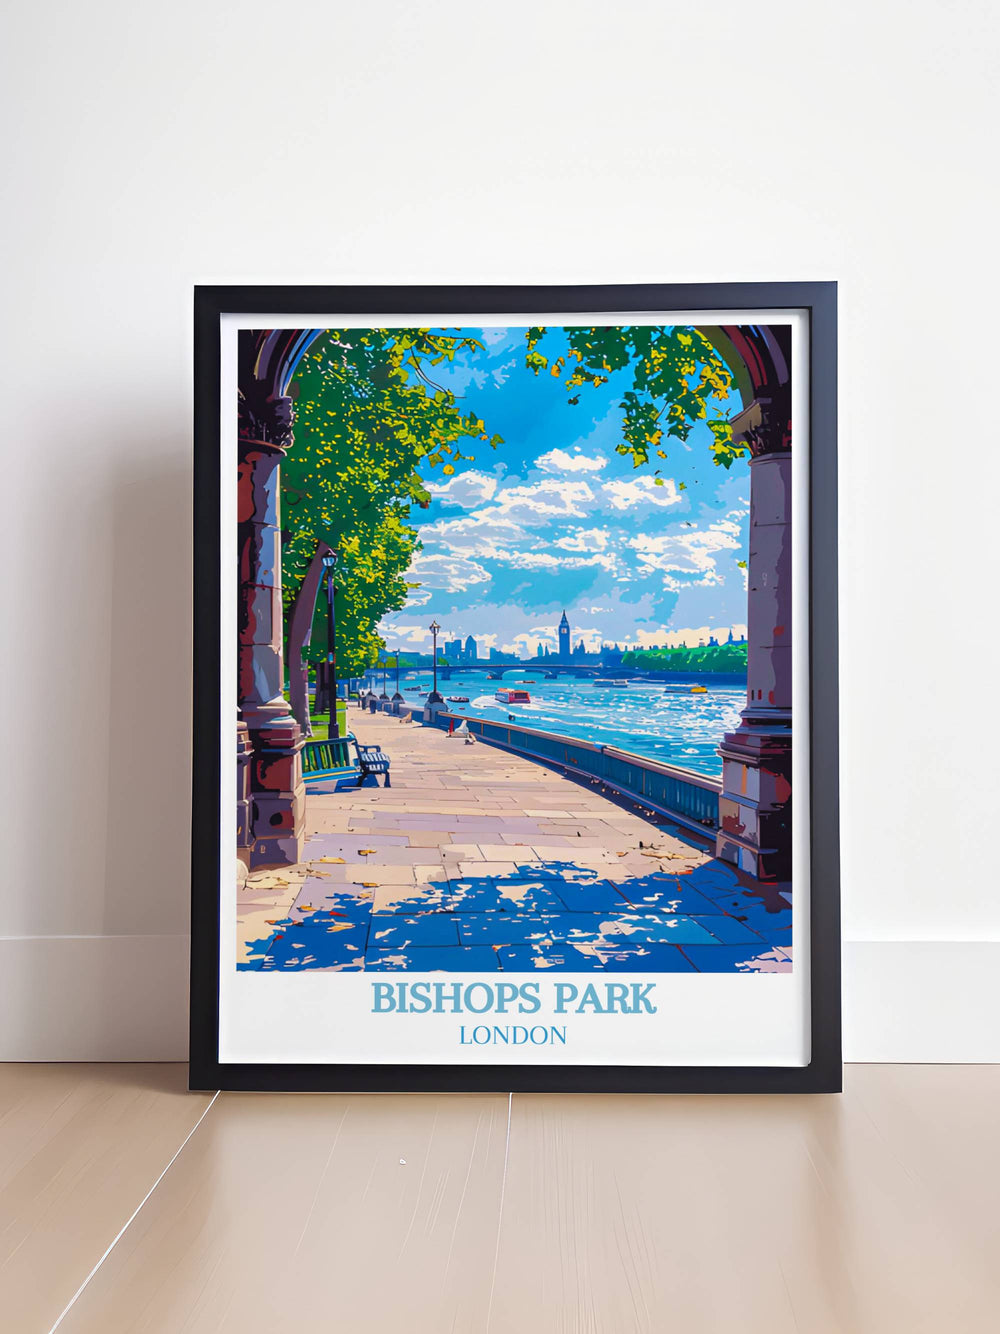 Captivating print of Londons Thames River capturing the essence of its river walk and surrounding natural beauty.